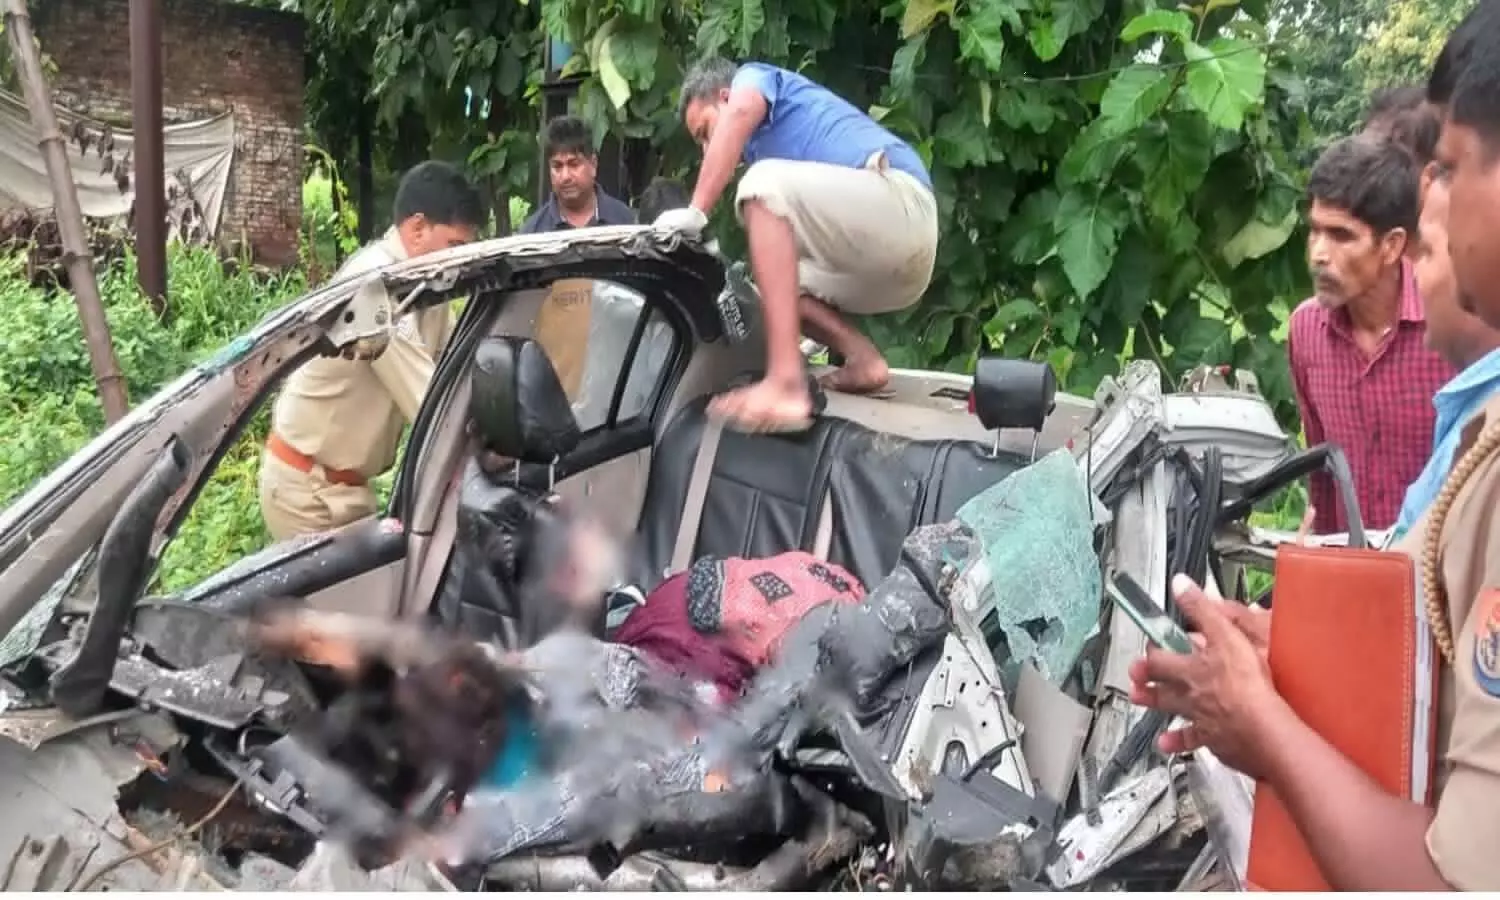 Lucknow - Gorakhpur 5 people died on the spot in a horrific road accident on the national highway.